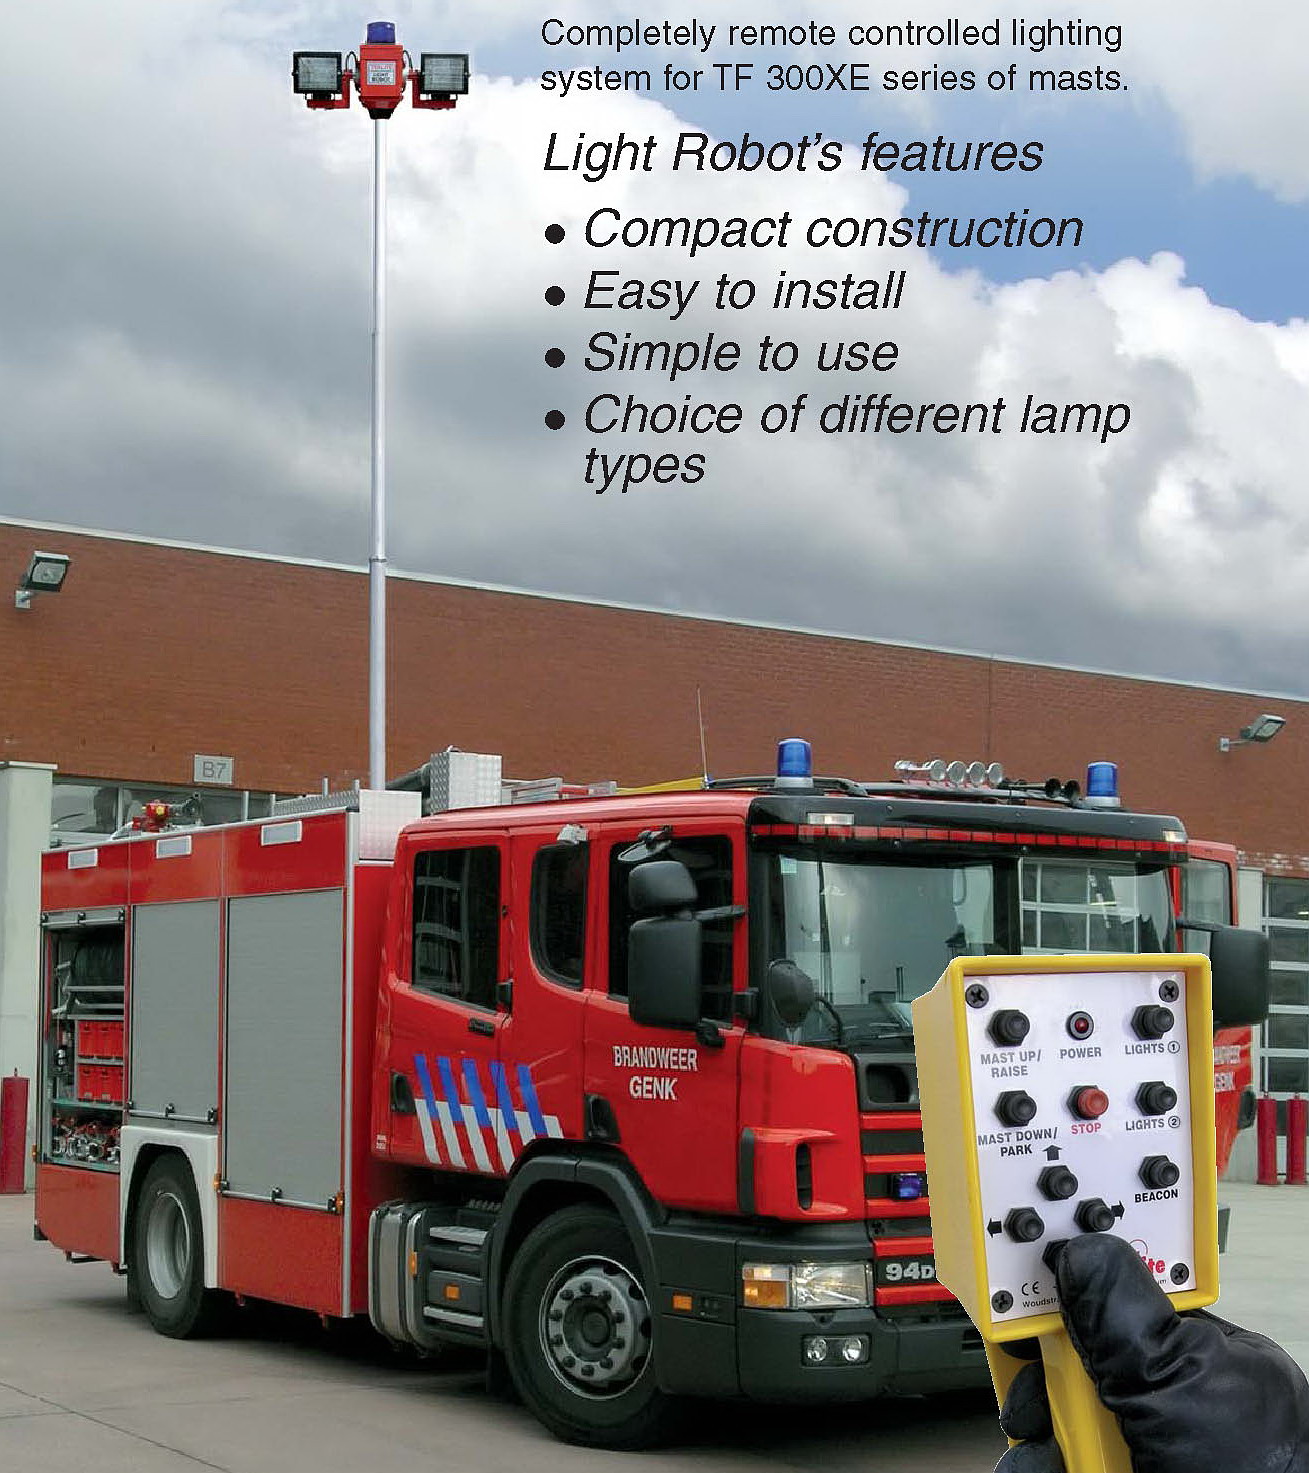 TF300XE Remote Controlled Lighting Robot on a Fire Engine